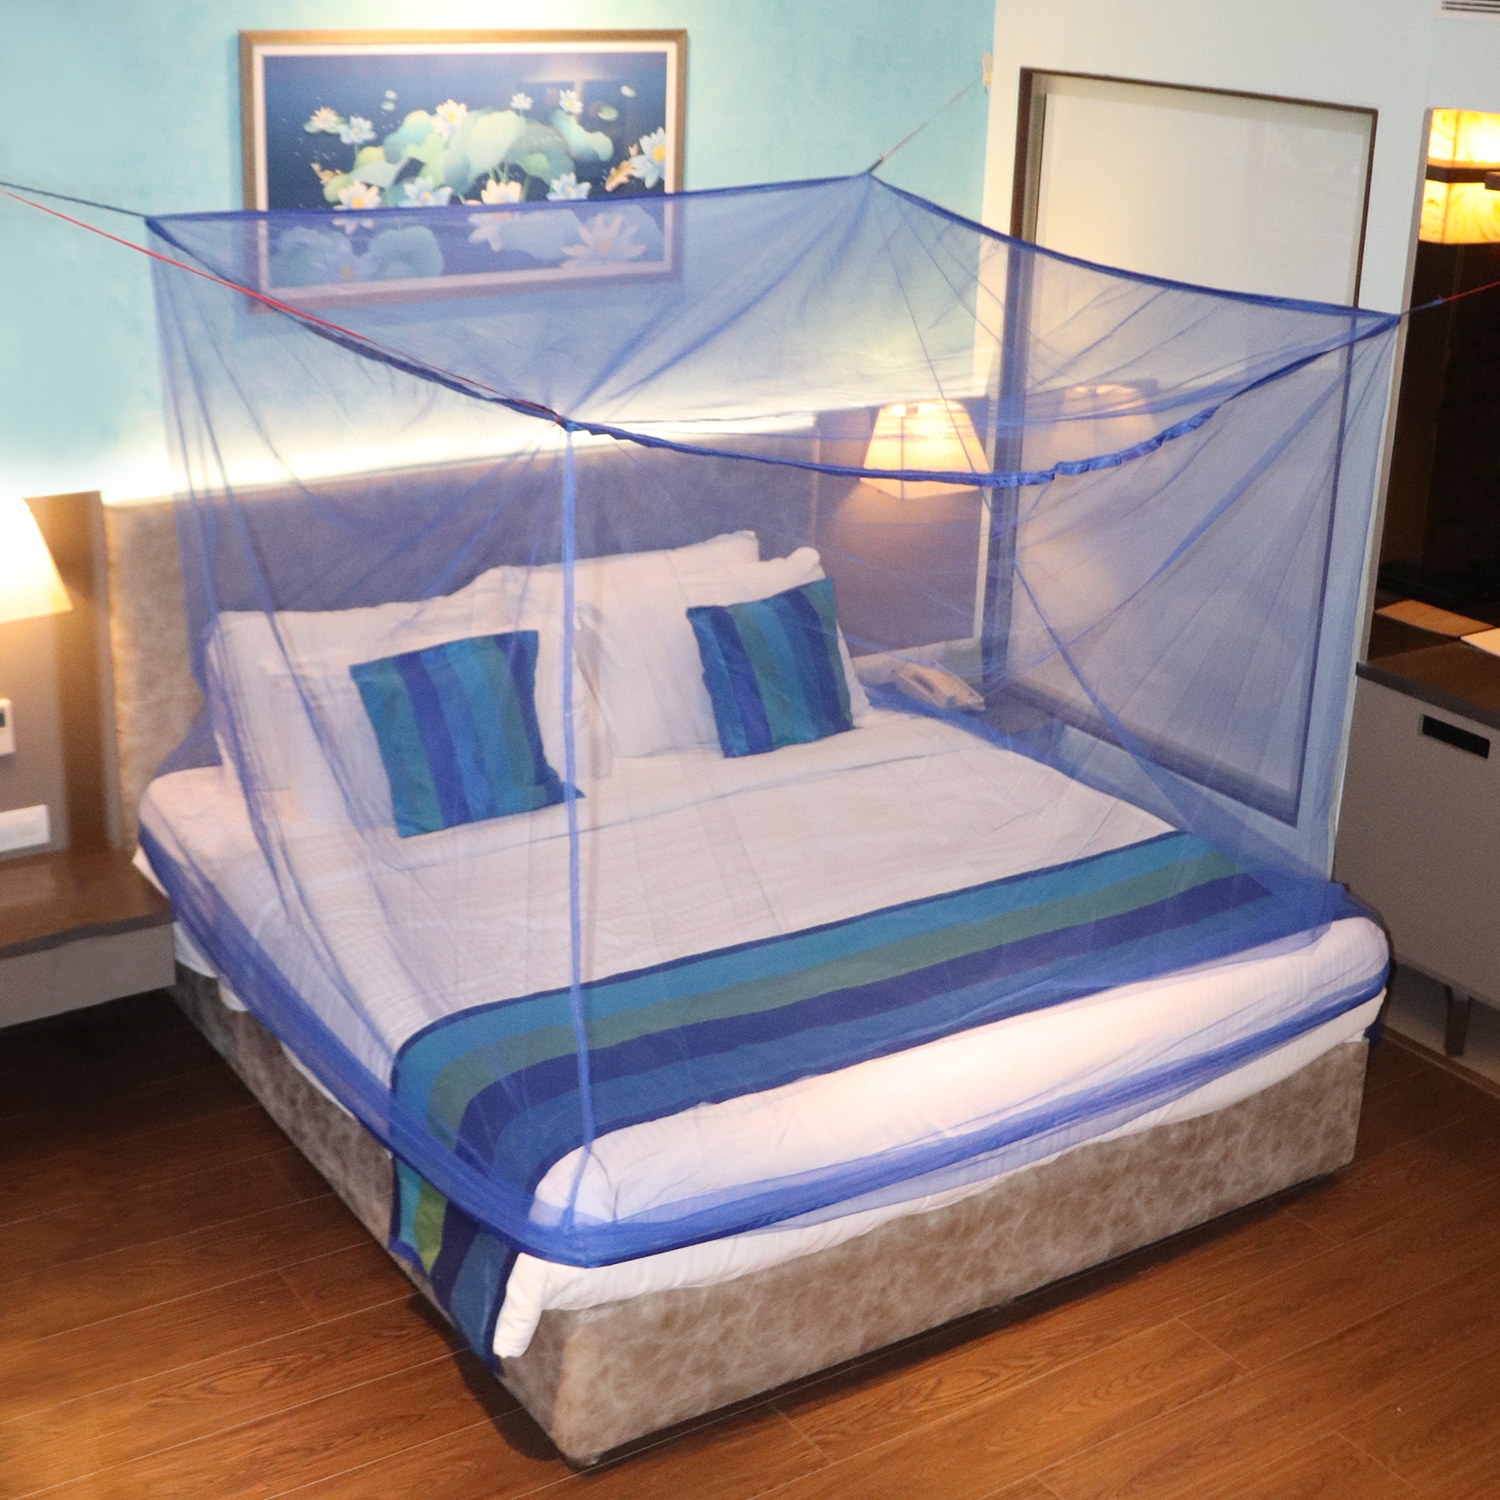 Mosquito Net for Double Bed, King-Size, Square Hanging Foldable Polyester Net Blue